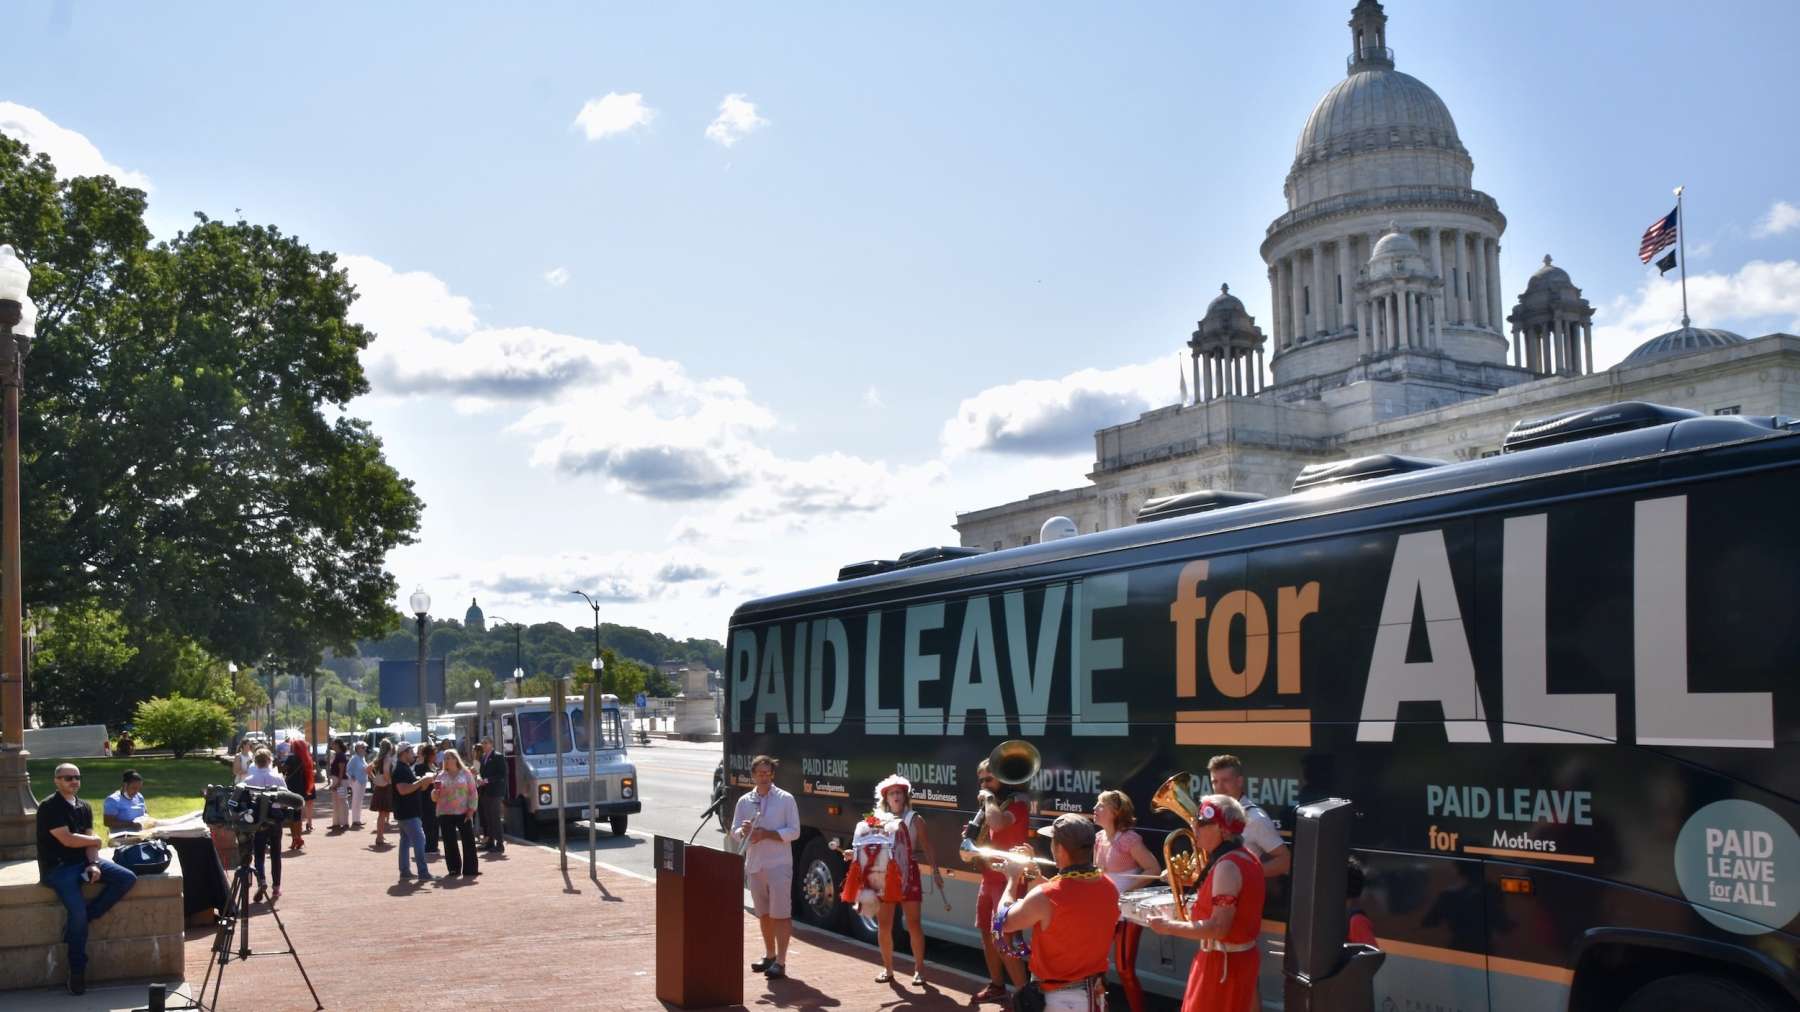 Paid Leave for All National Bus Tour kicks off from Rhode Island